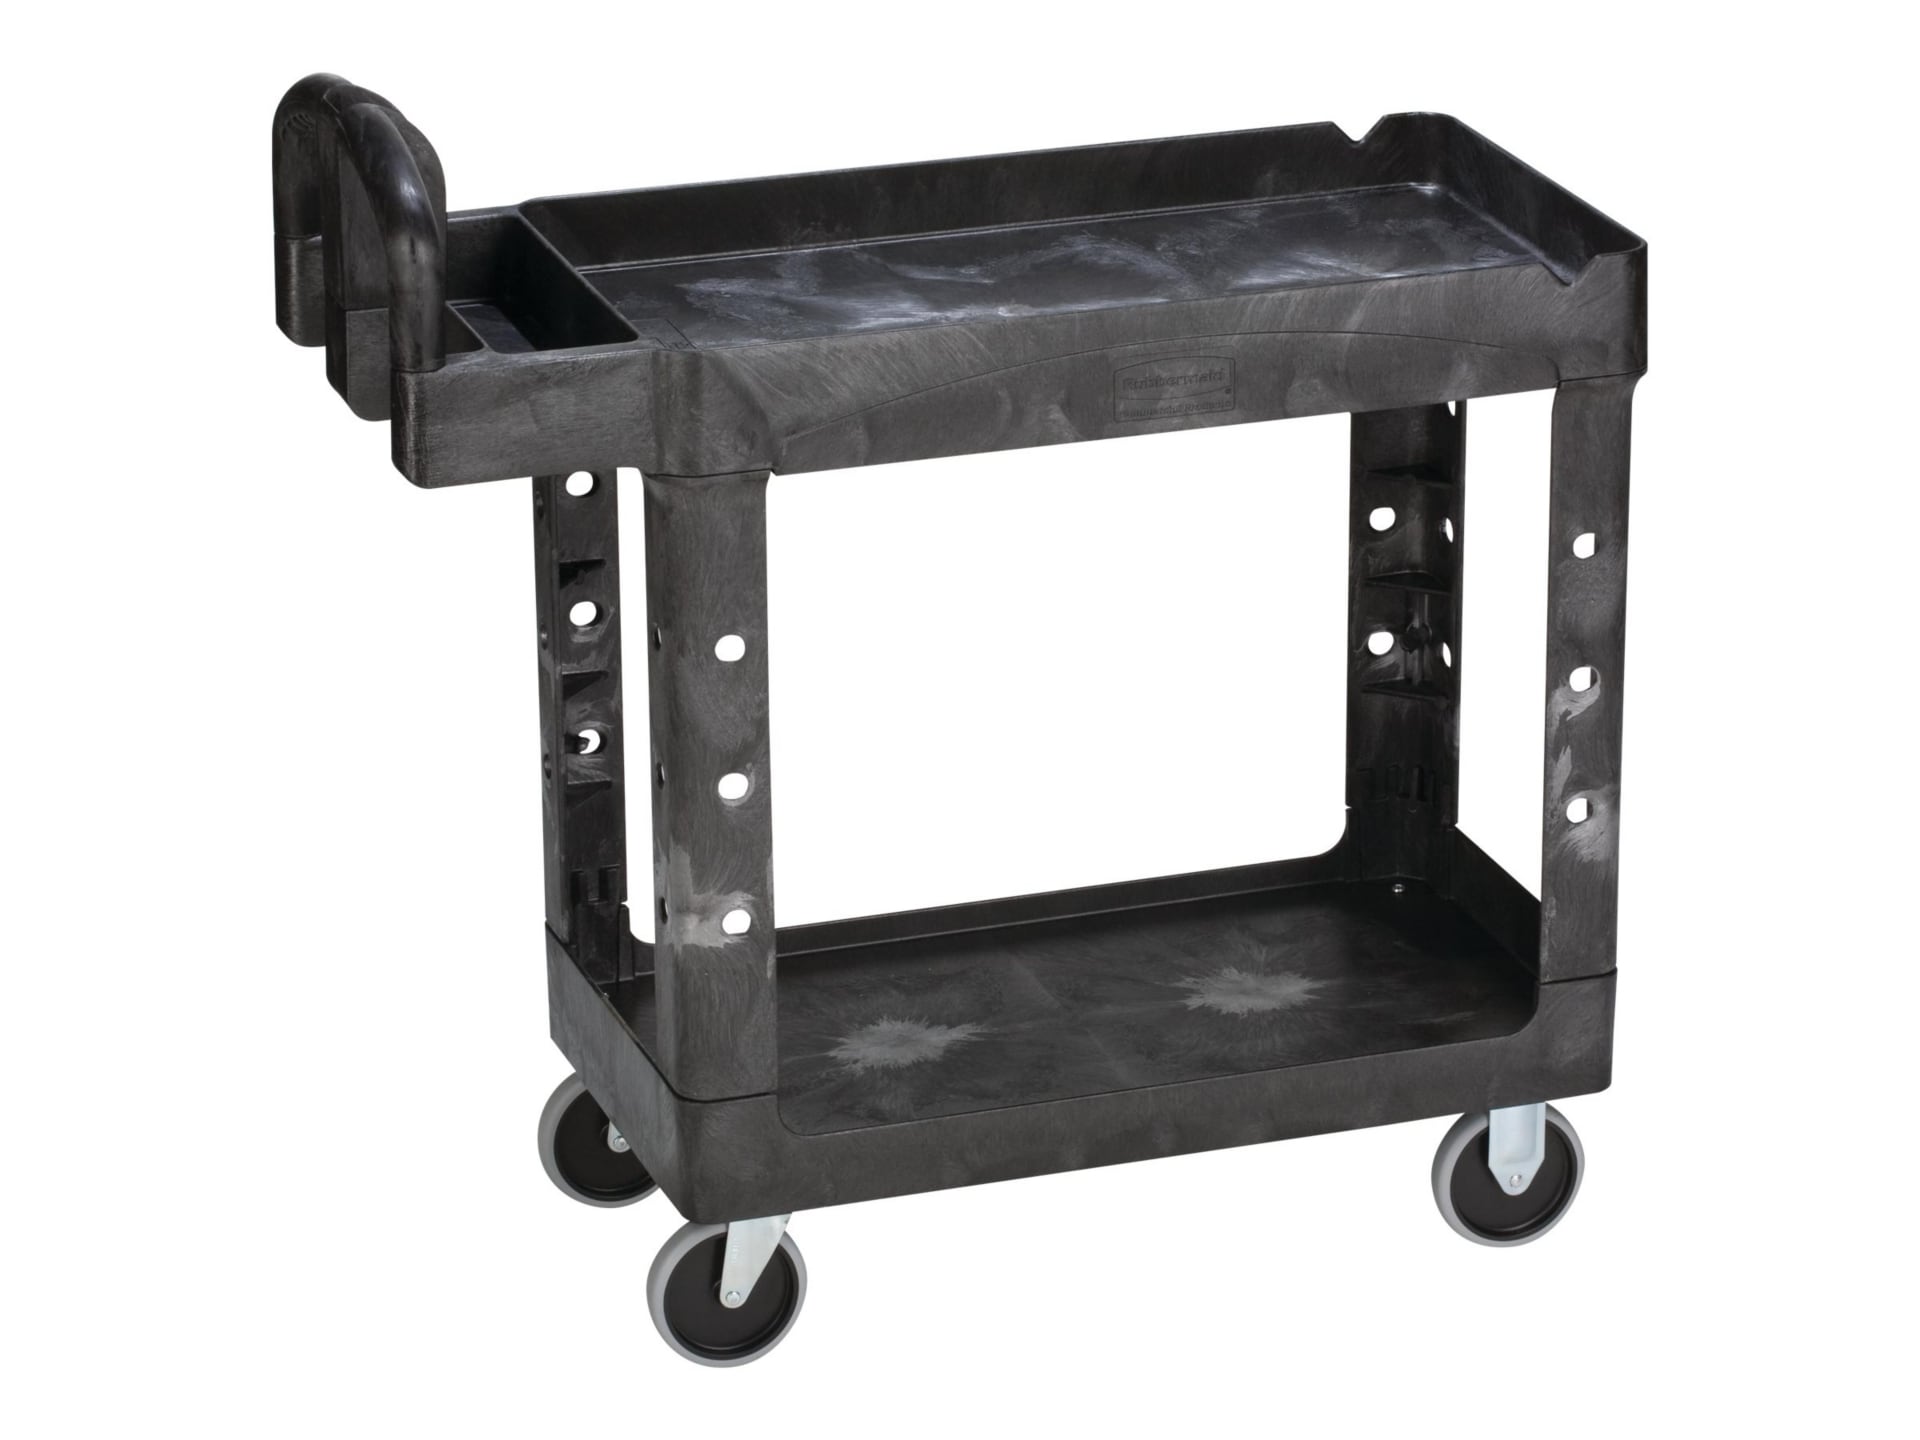 Rubbermaid Commercial Products Utility Cart - trolley - 2 shelves - black